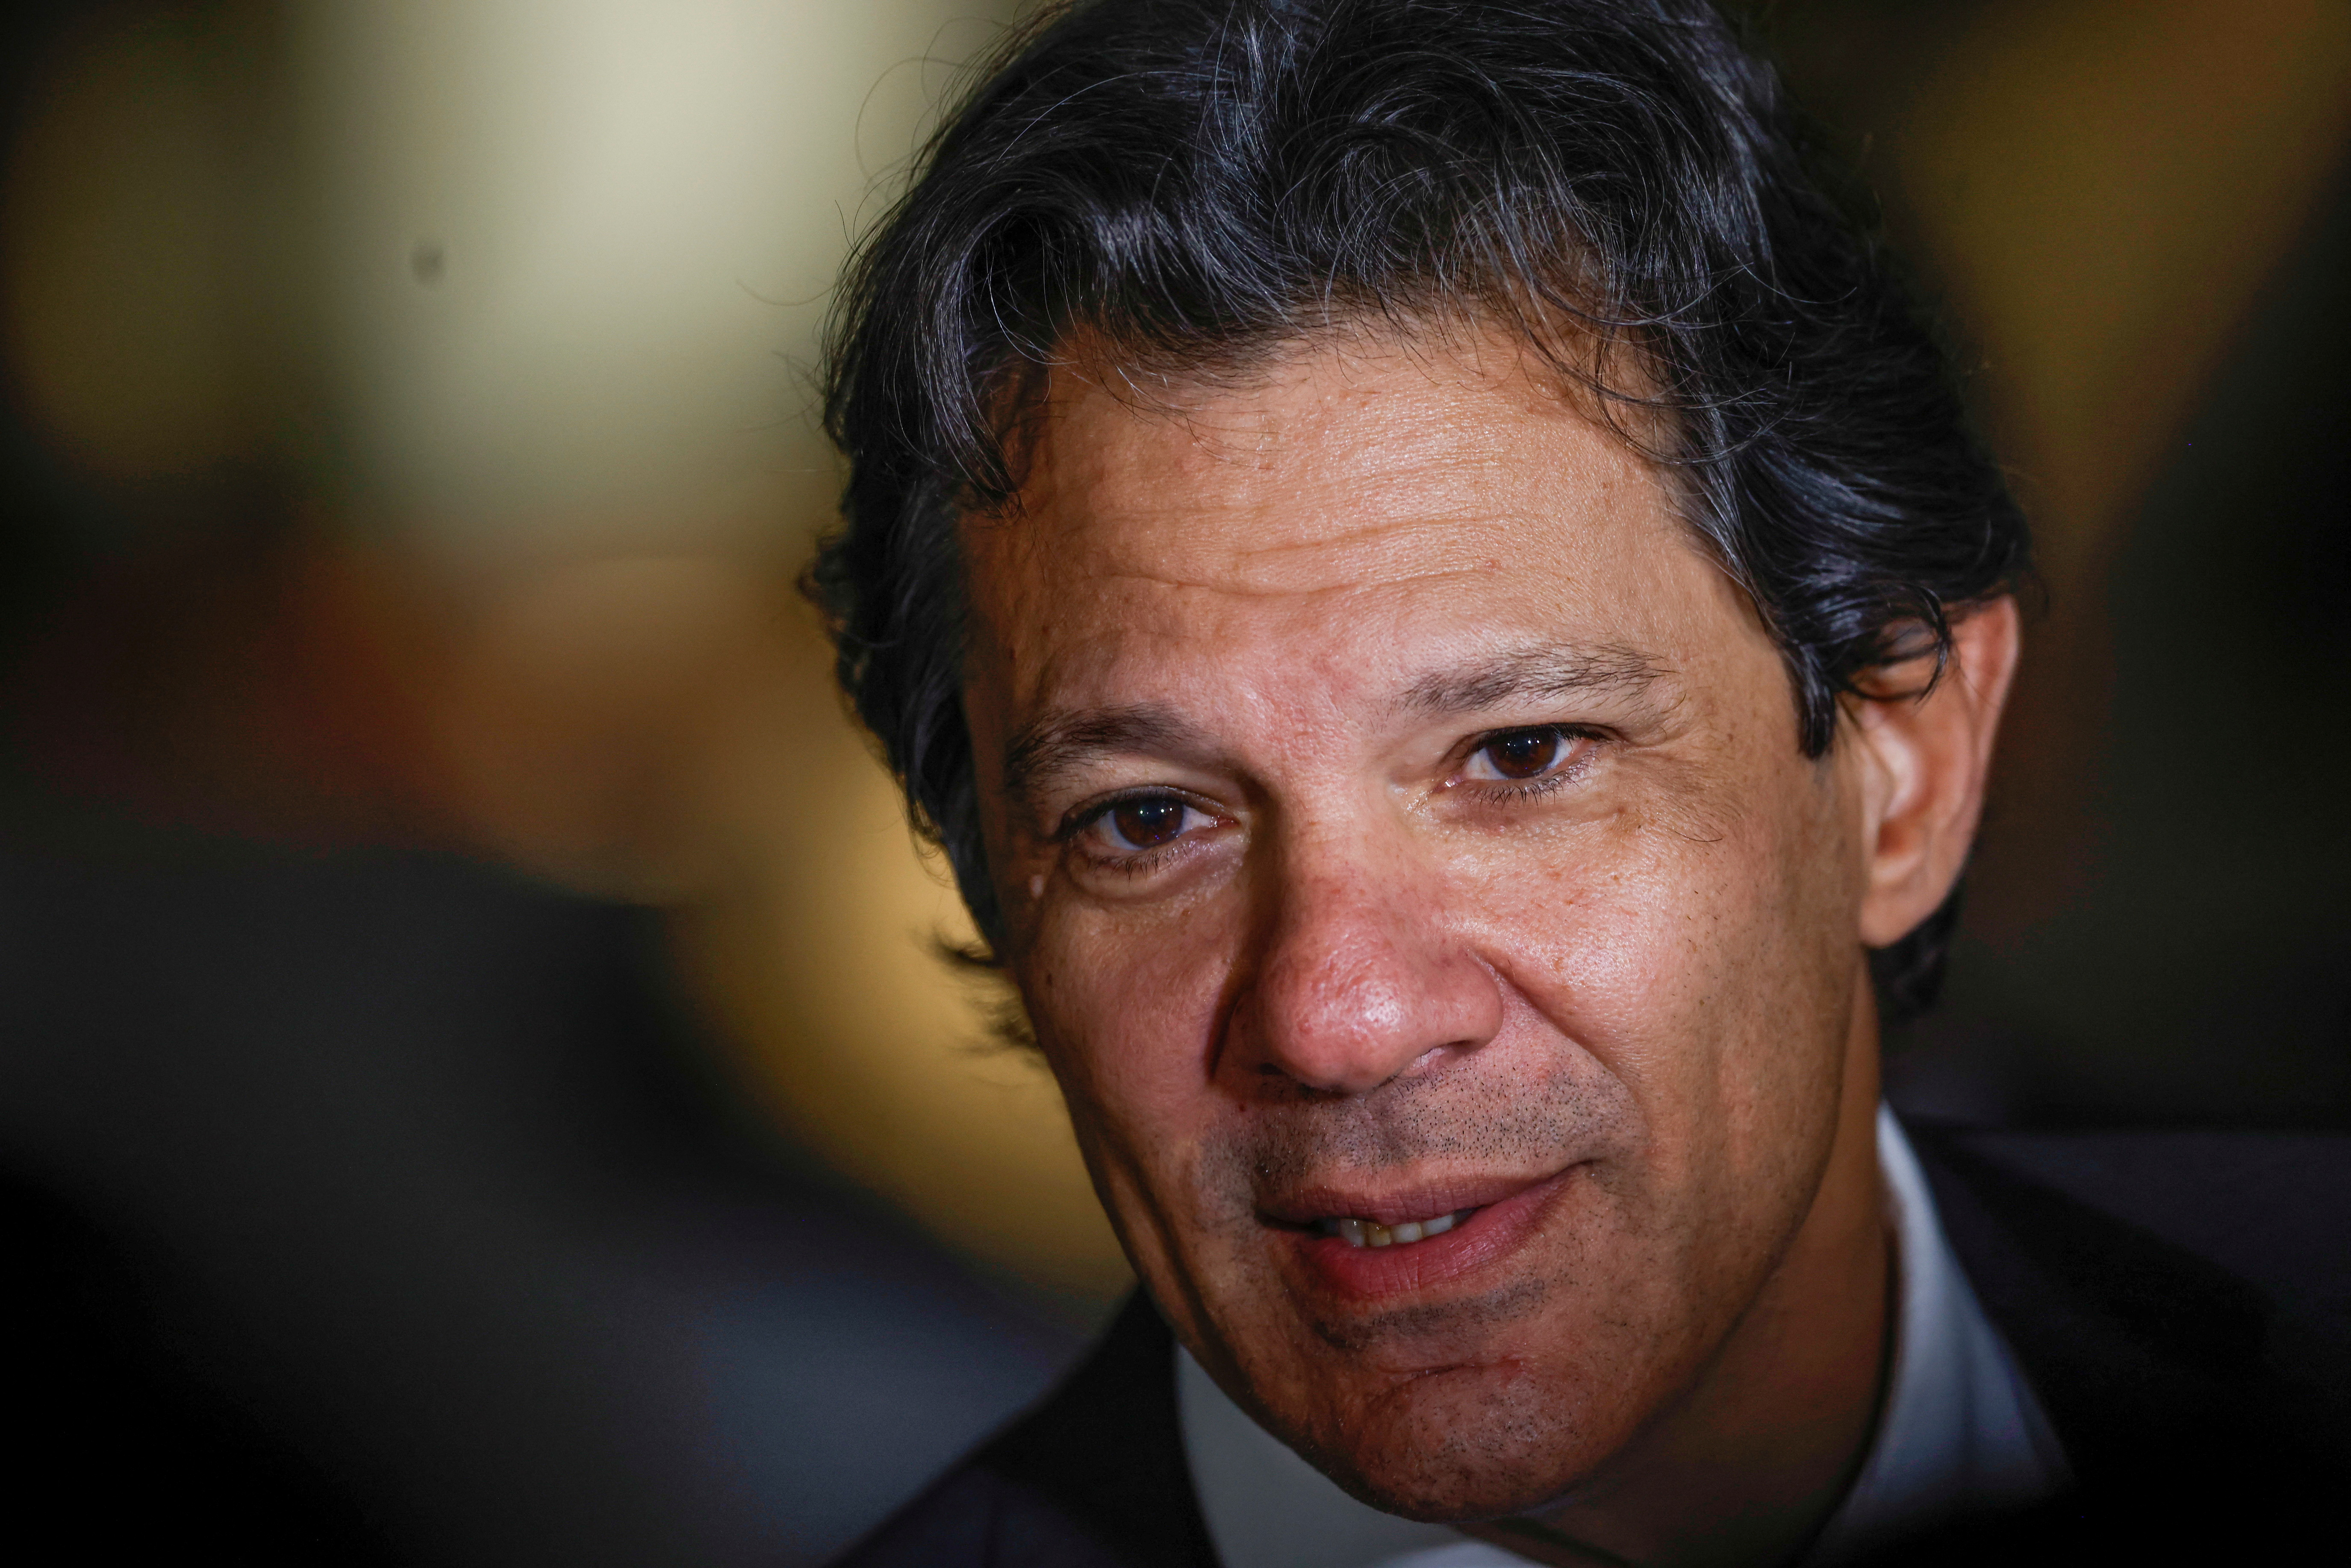 Former Mayor Fernando Haddad talks with journalists after attending a meeting at the transition government building in Brasilia